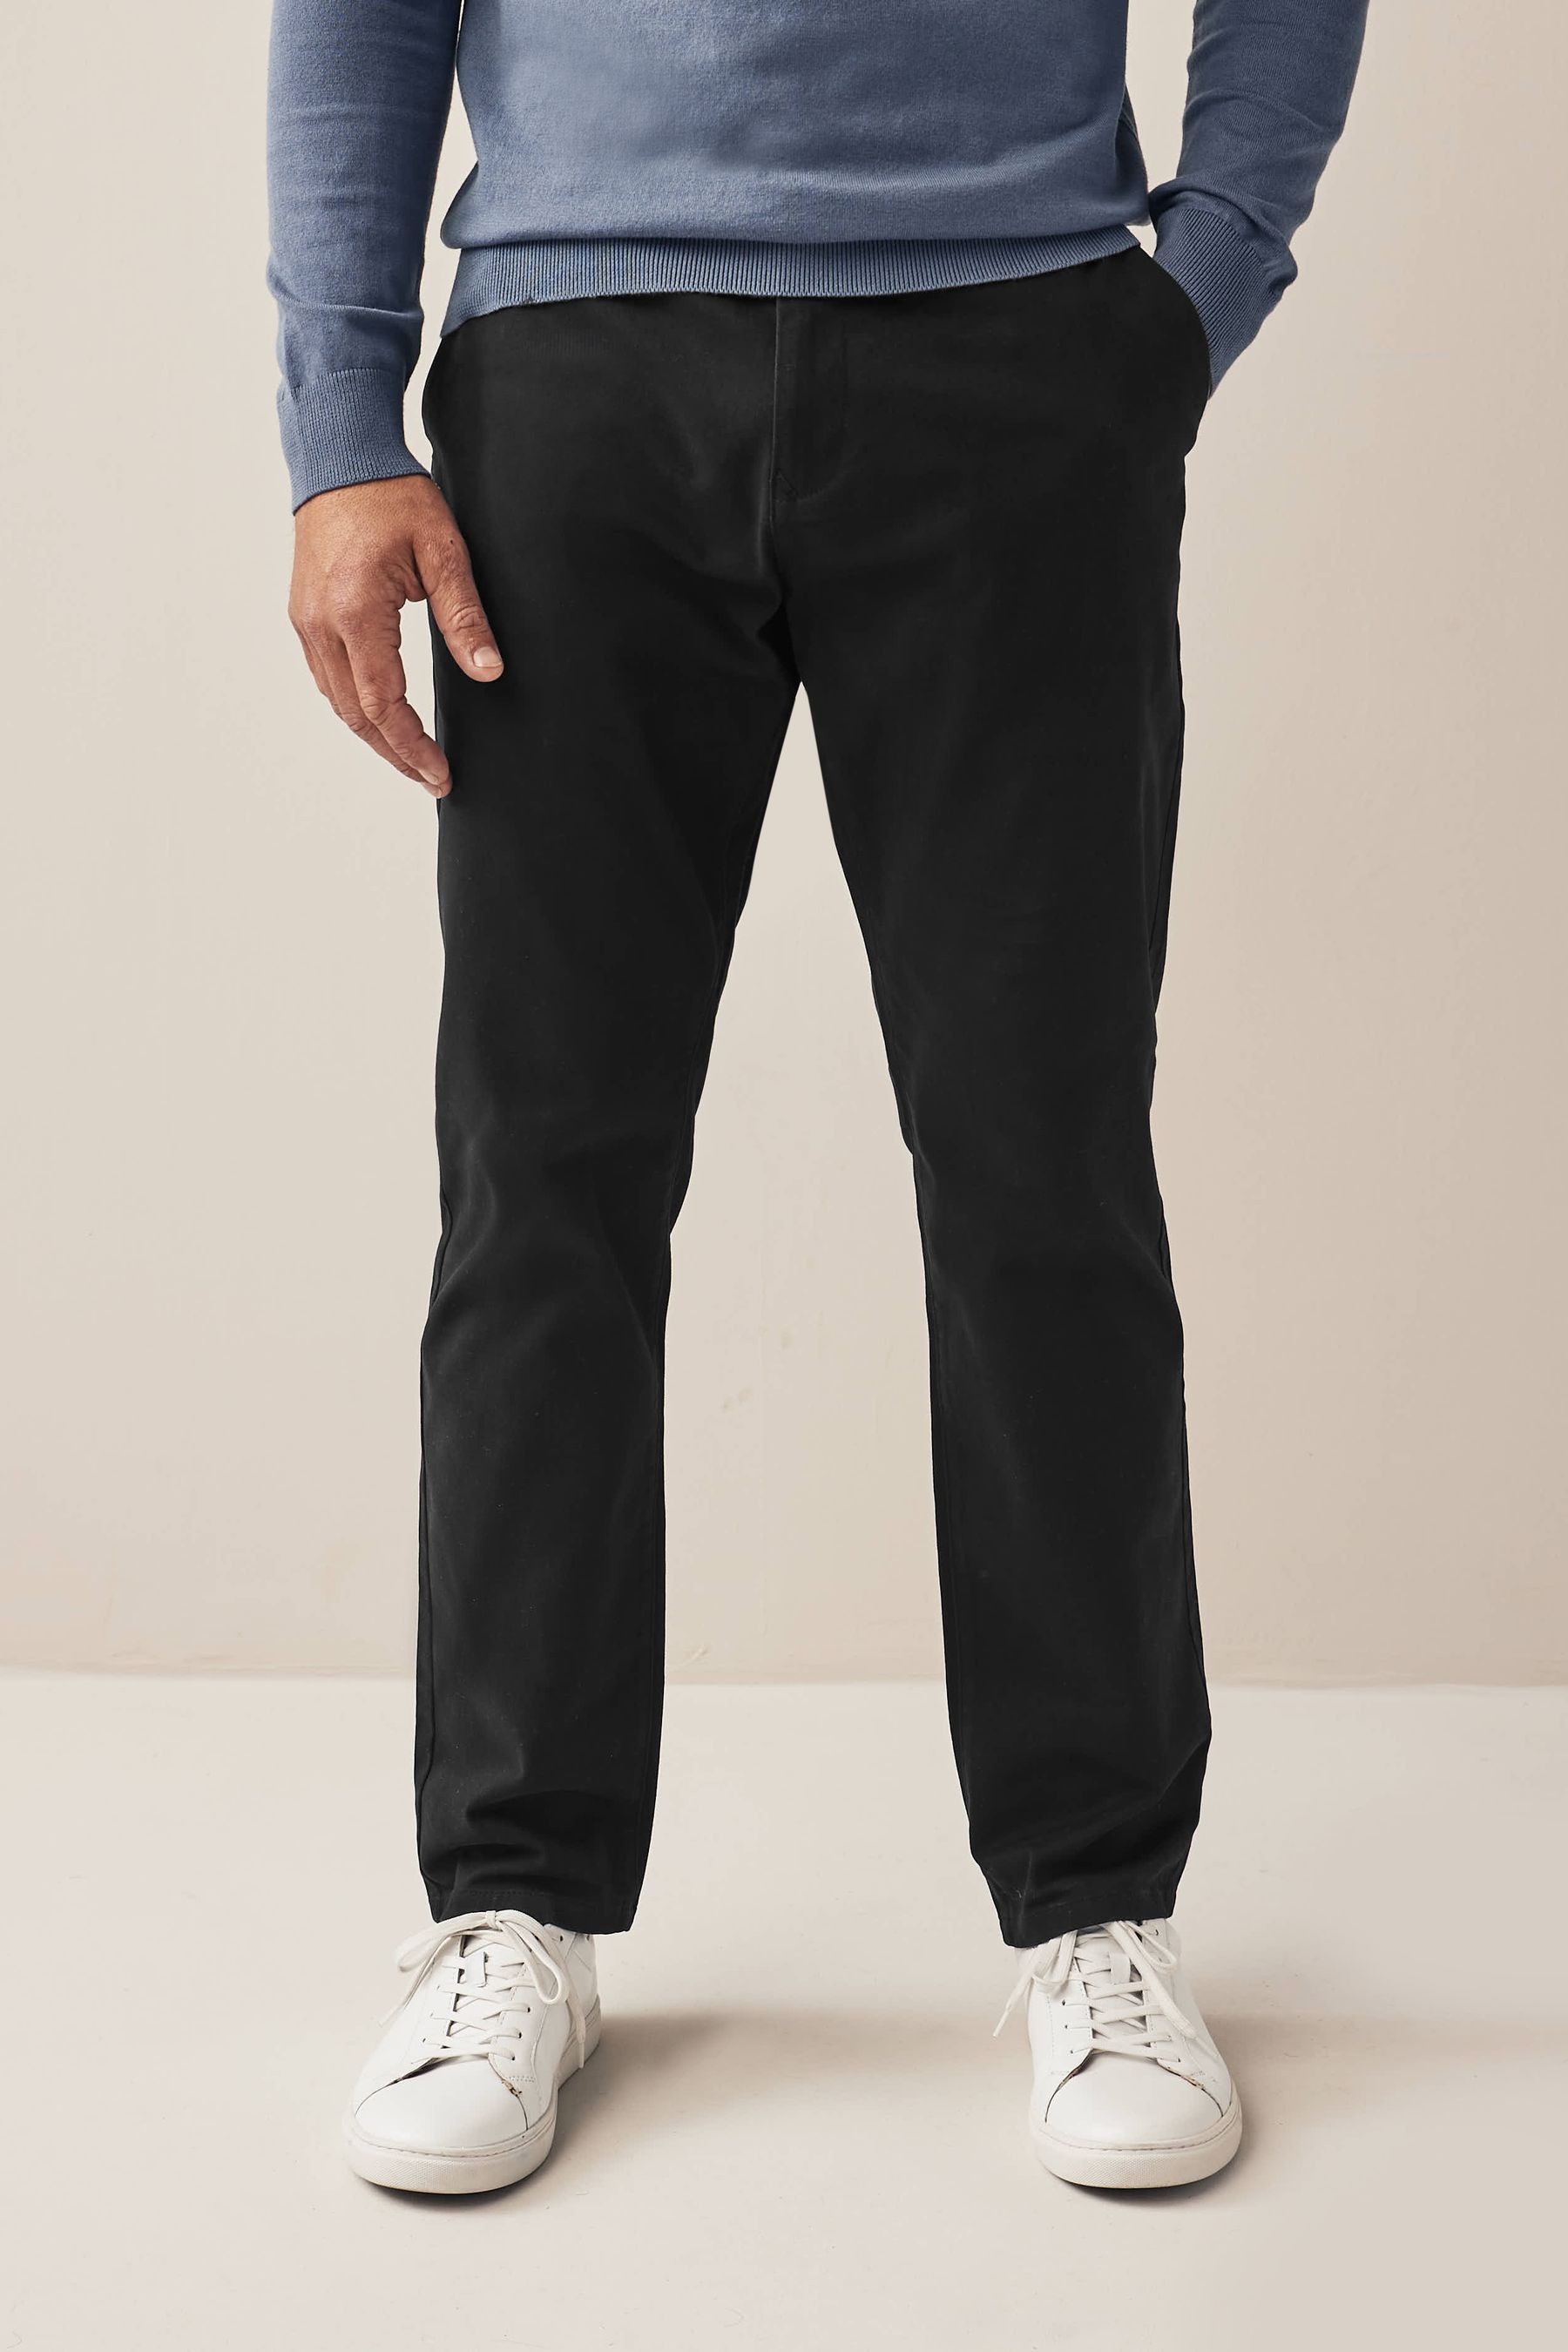 Buy Black/Black Slim Stretch Chino Trousers 2 Pack from the Next UK ...